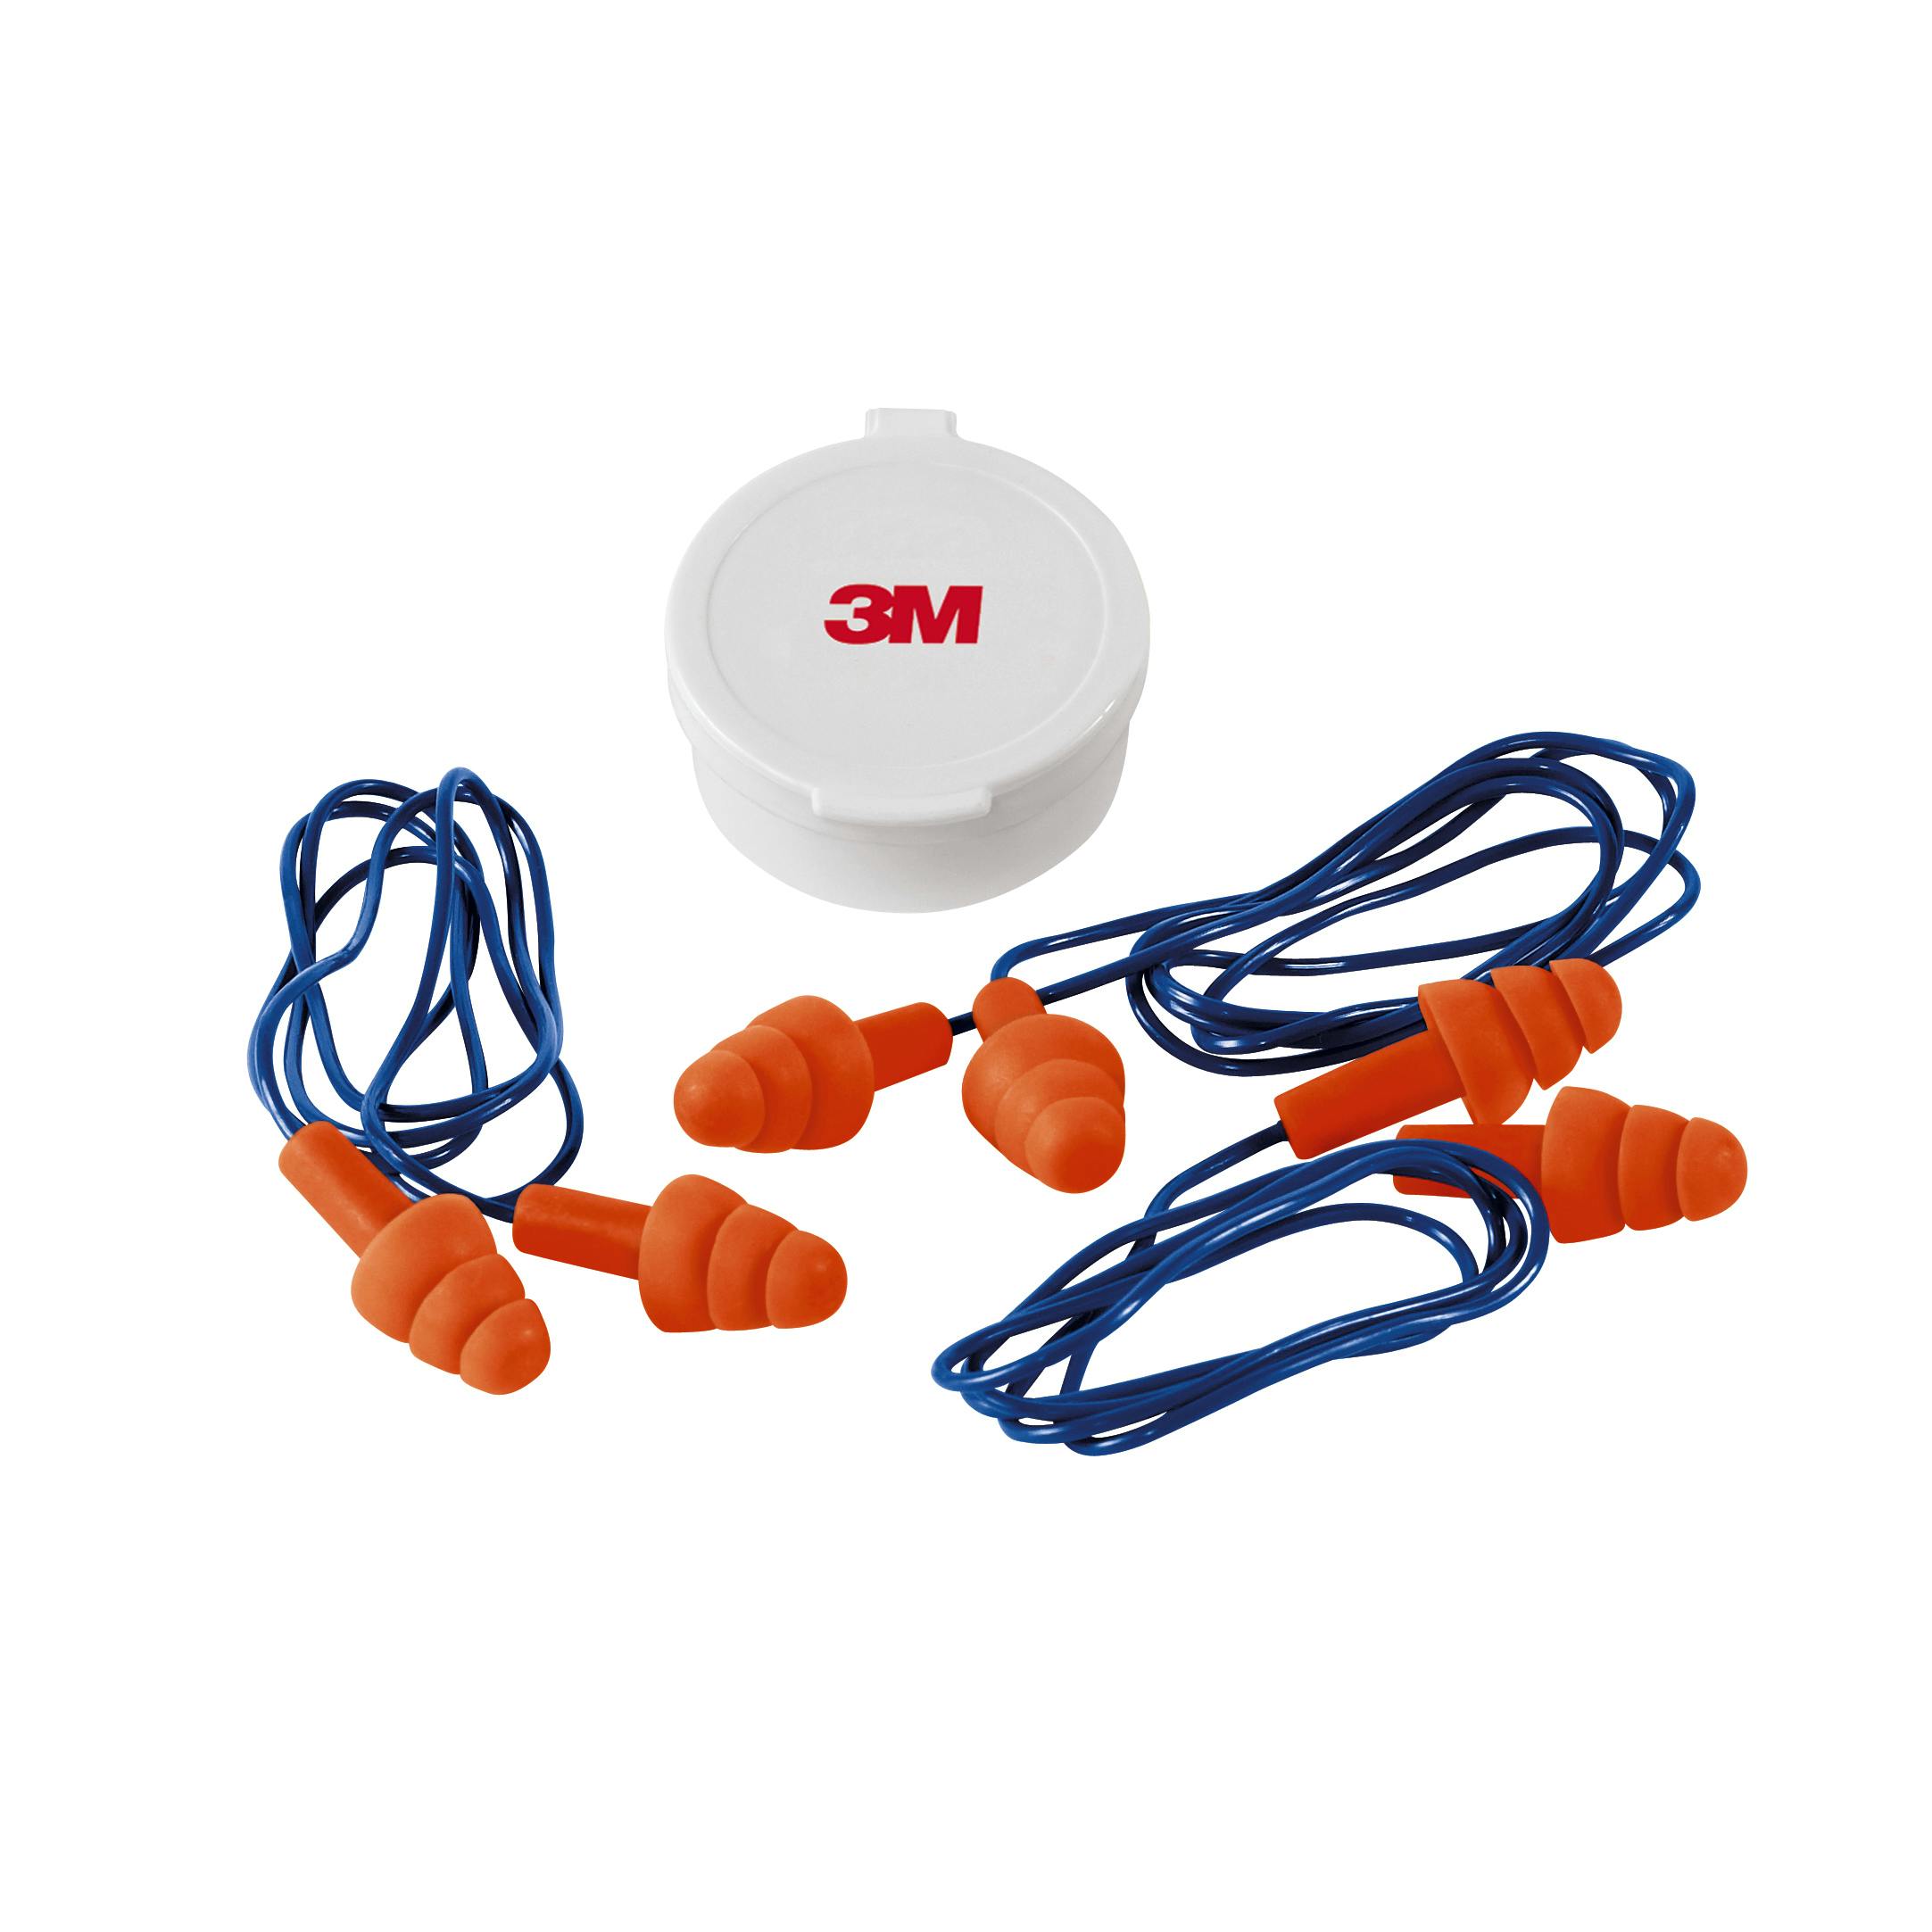 3M™ Corded Reusable Earplugs, 90716H3-DC, 3 pairs with case per pack, 10_3